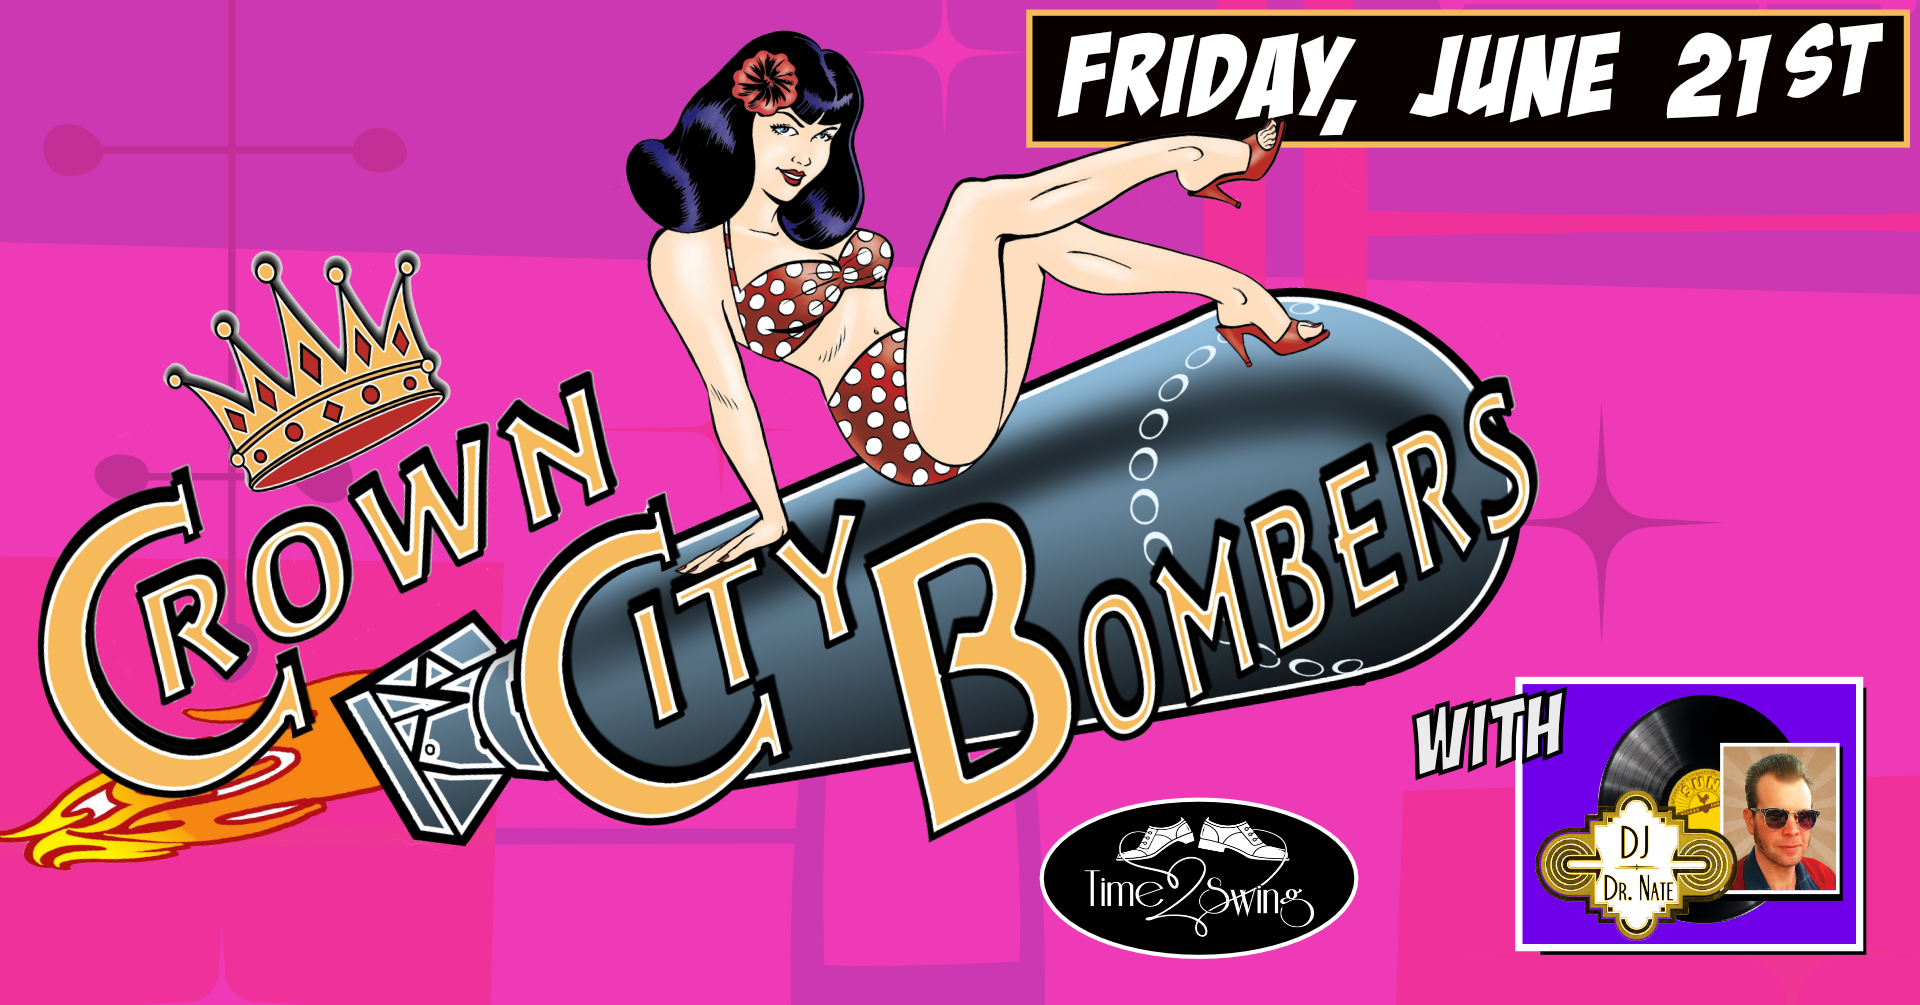 CROWN CITY BOMBERS with DJ DR NATE and TIME2SWING